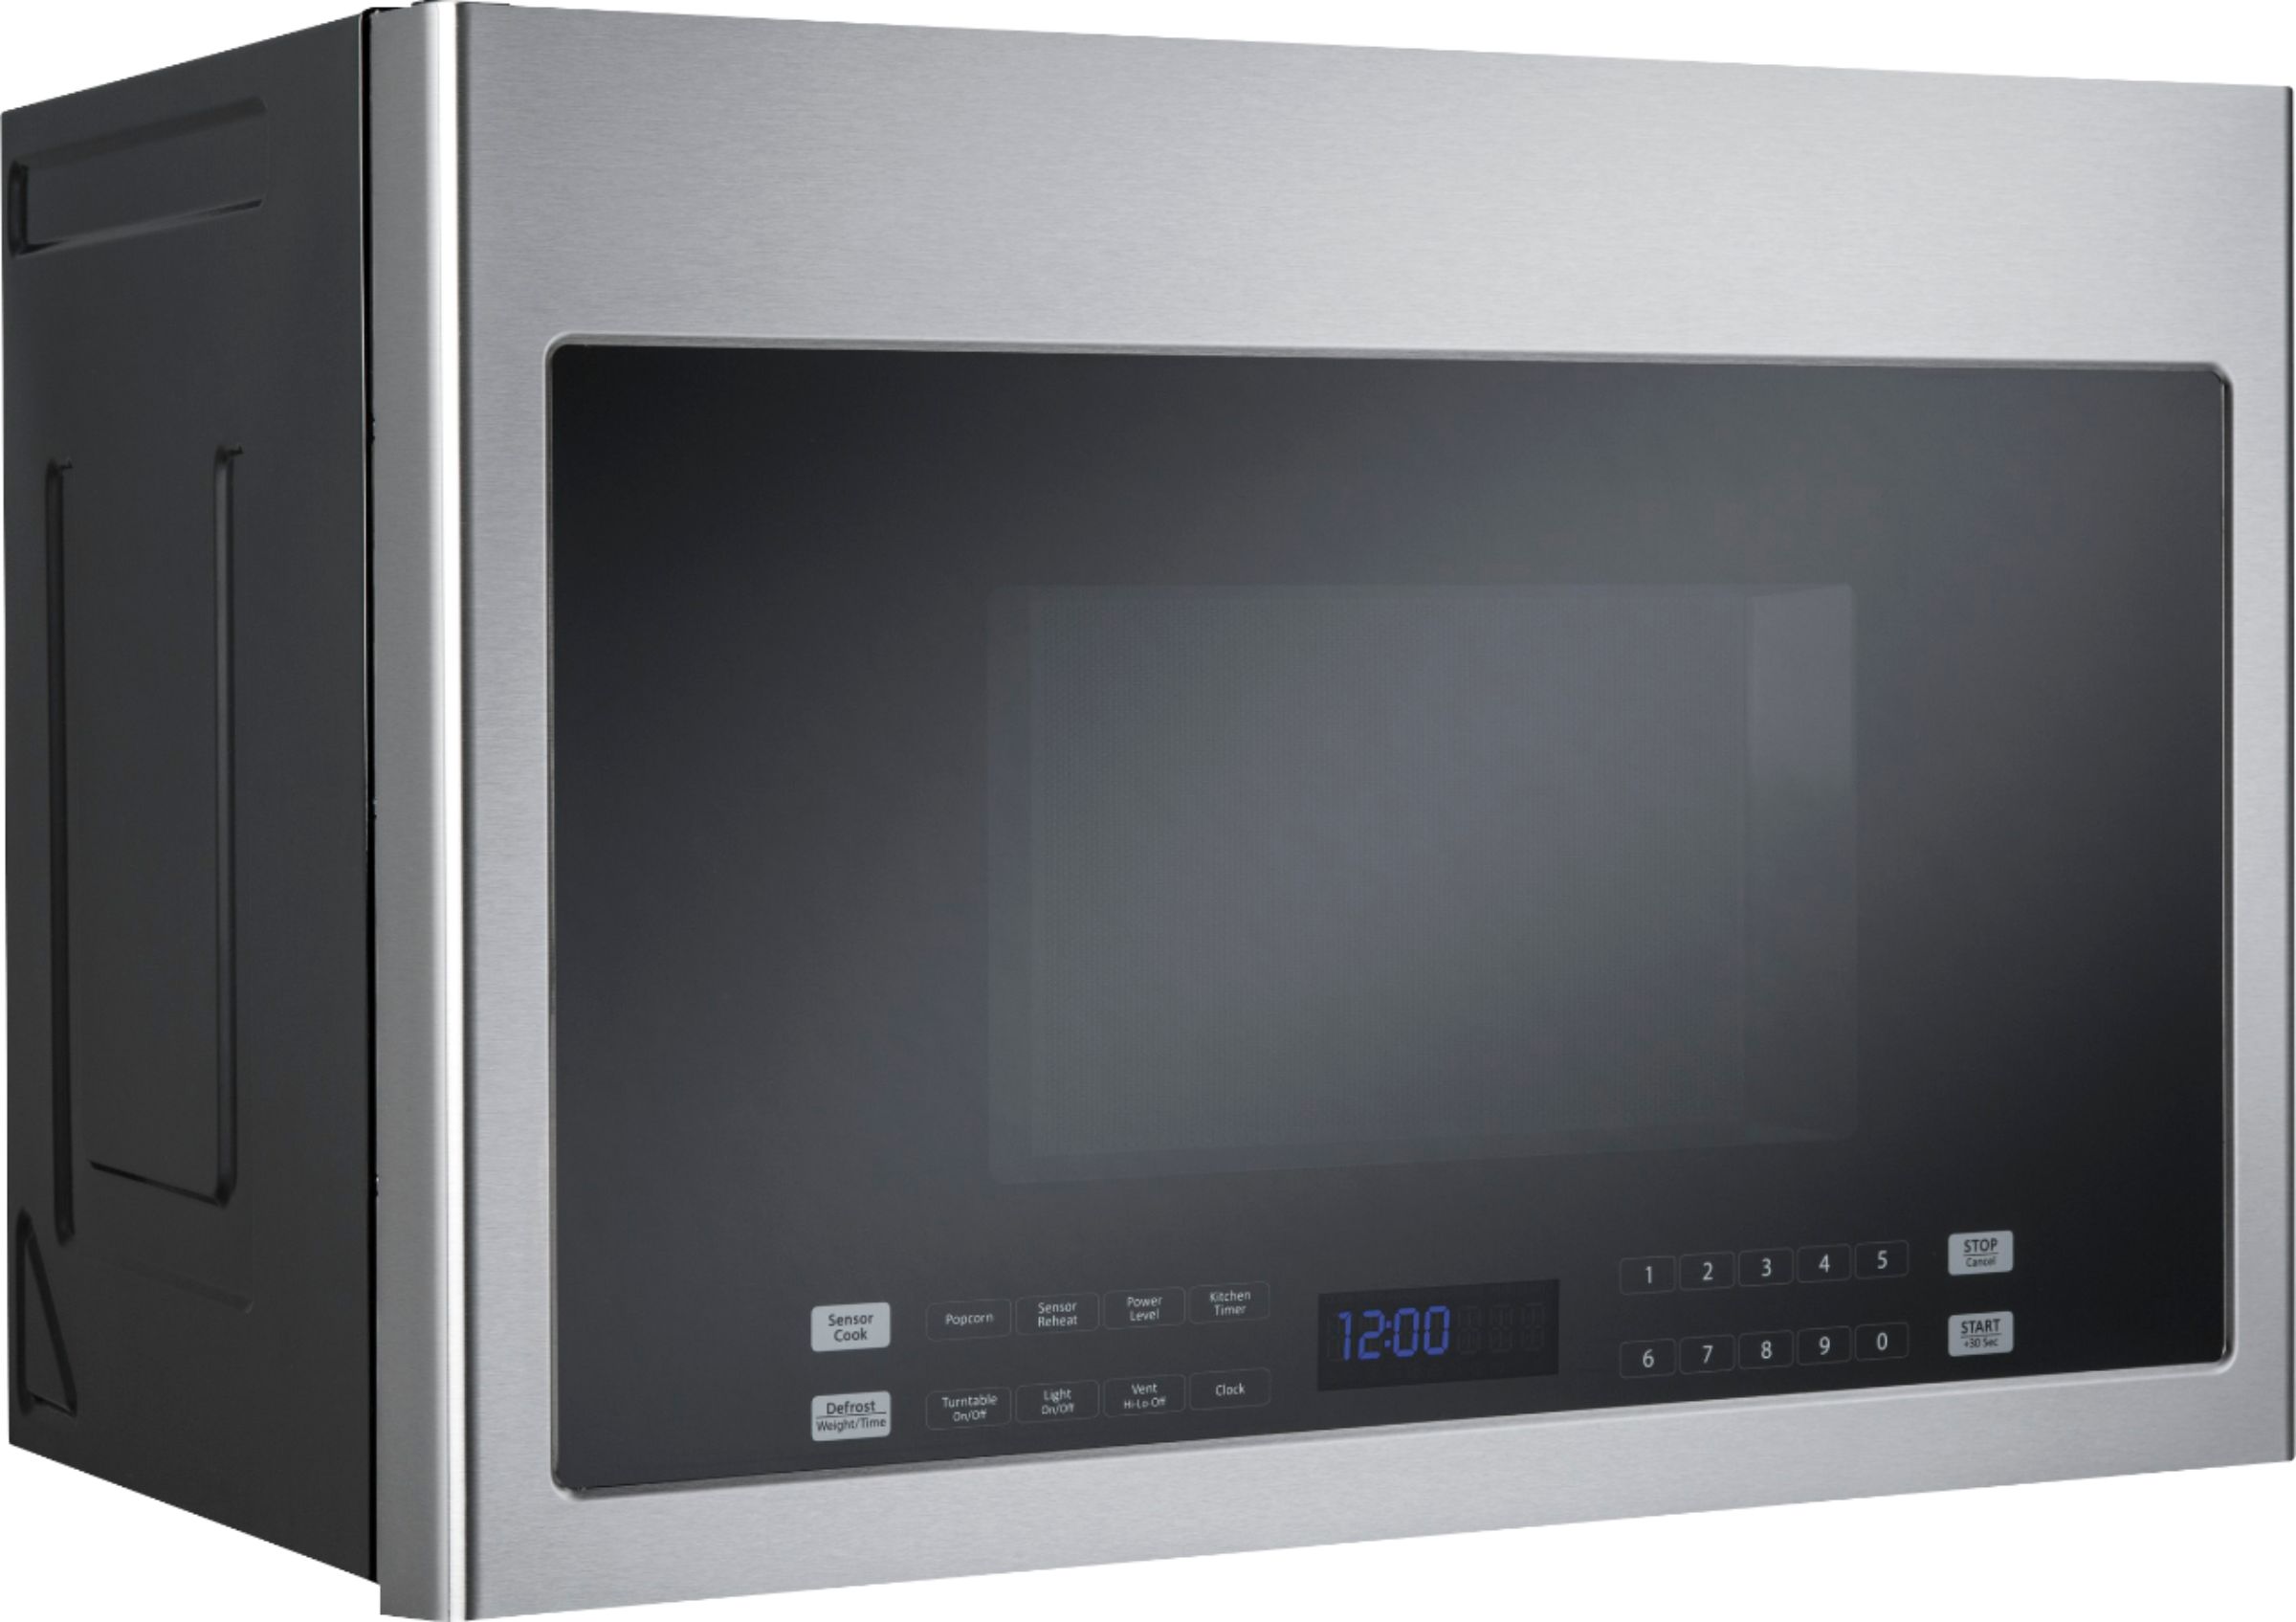 Angle View: Haier - 1.4 Cu. Ft. Over-the-Range Microwave with Sensor Cooking - Stainless steel